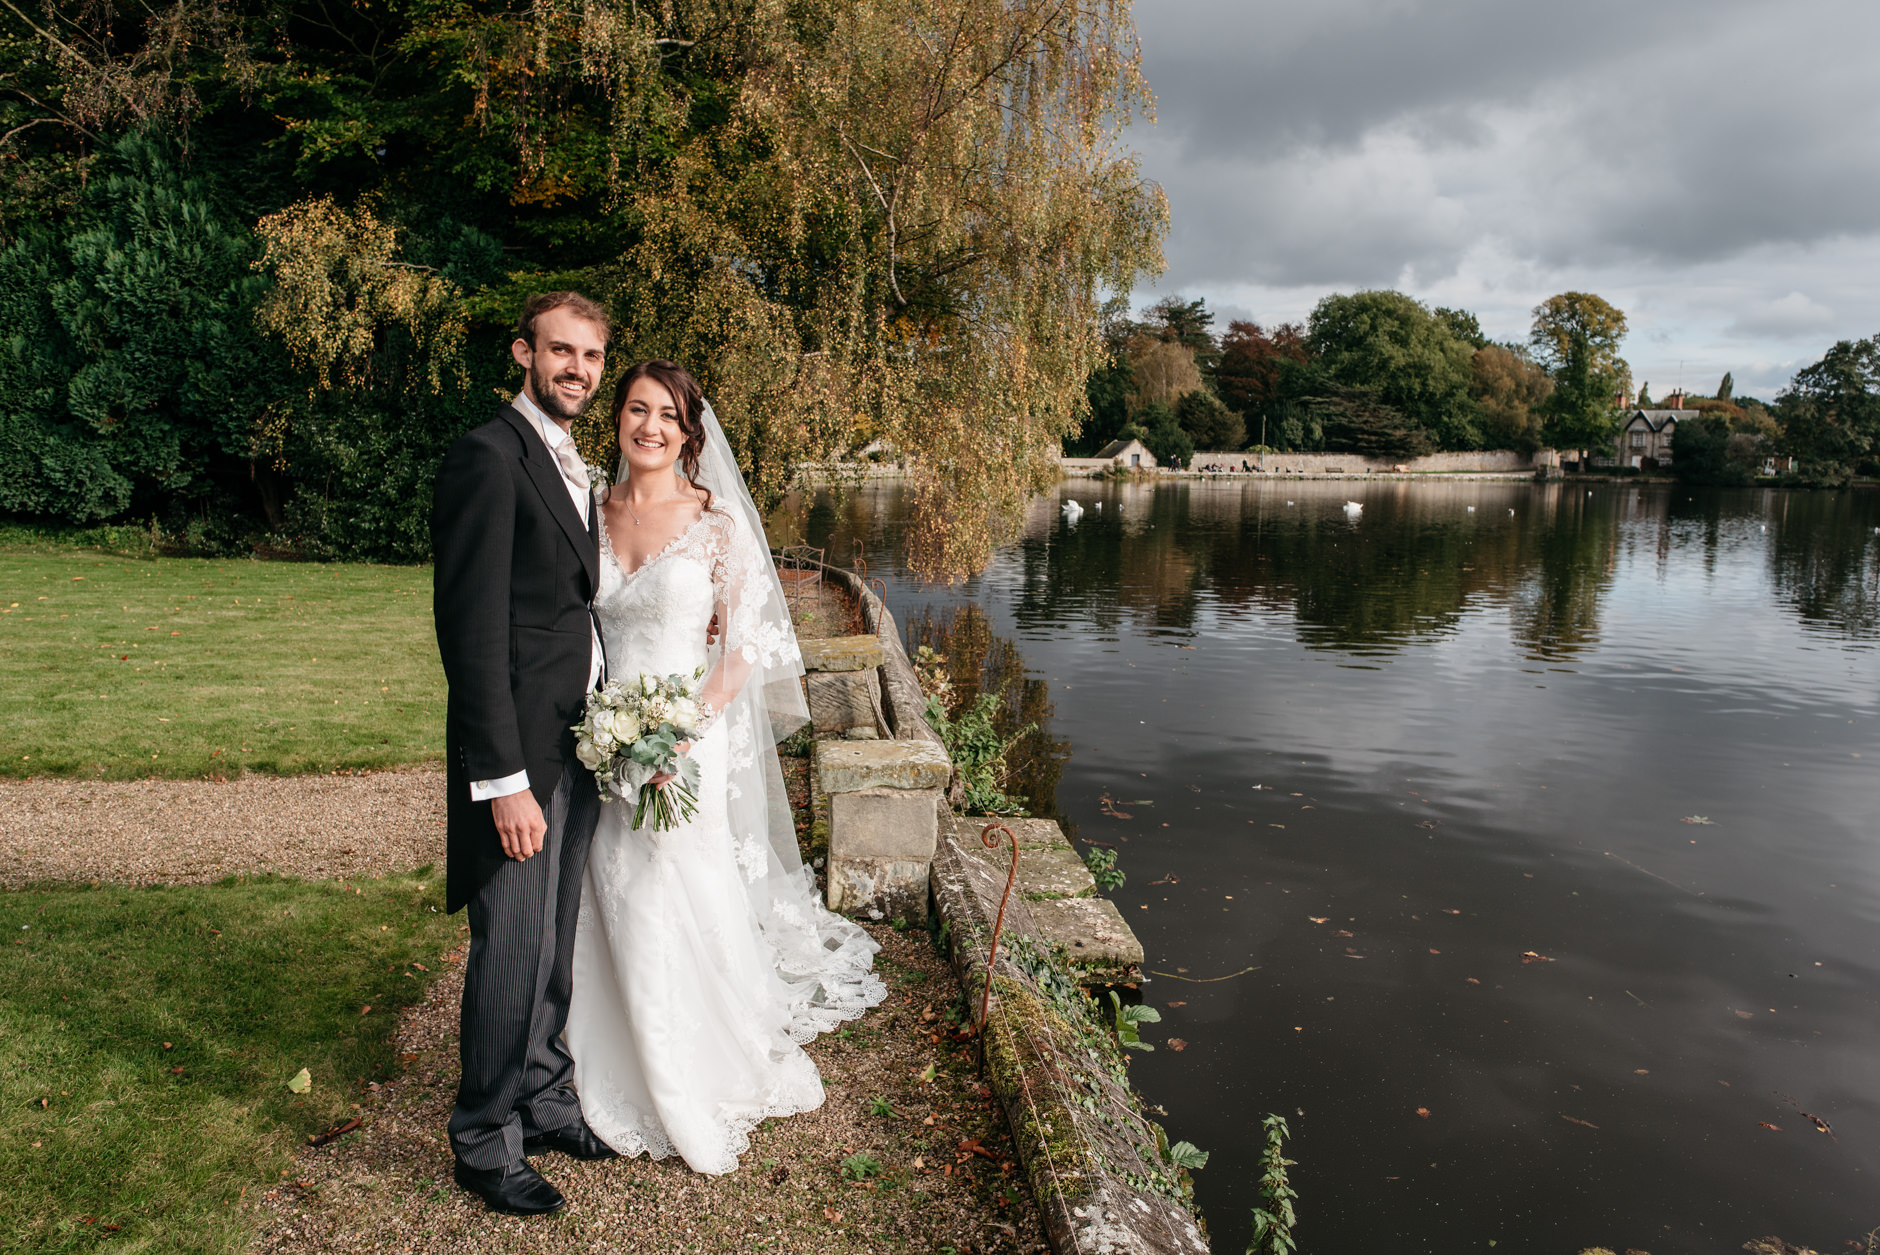 Relaxed wedding portrait at Melbourne Pool in Derbyshire